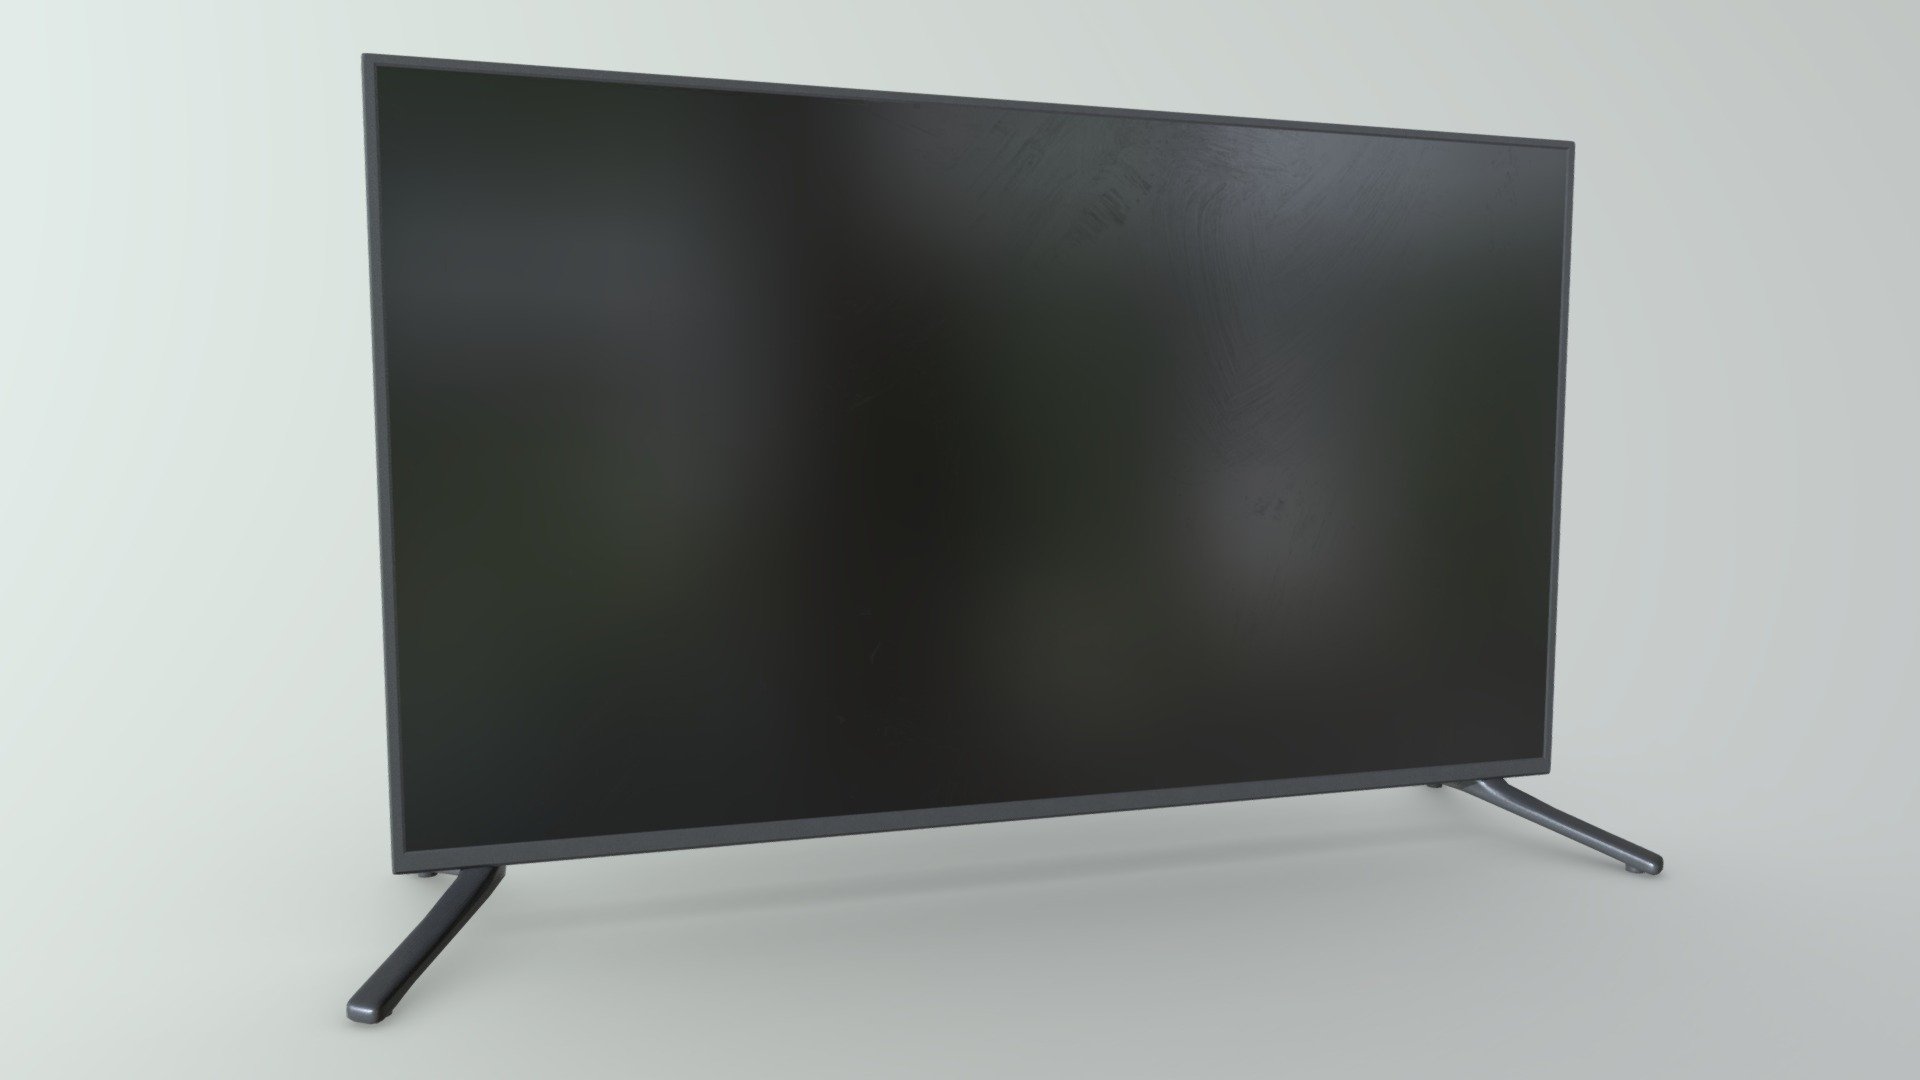 Flat screen LED TV with stand mount.

Faces: 1,272

Quad-Only: No

LOD Groups: None

Overlapping UV: Yes

Lightmap UV: No

Material Count: 1

Texture Resolution: 2048x2048x8 PNG (16bit normal) - Flat Screen Television - Download Free 3D model by HippoStance 3d model